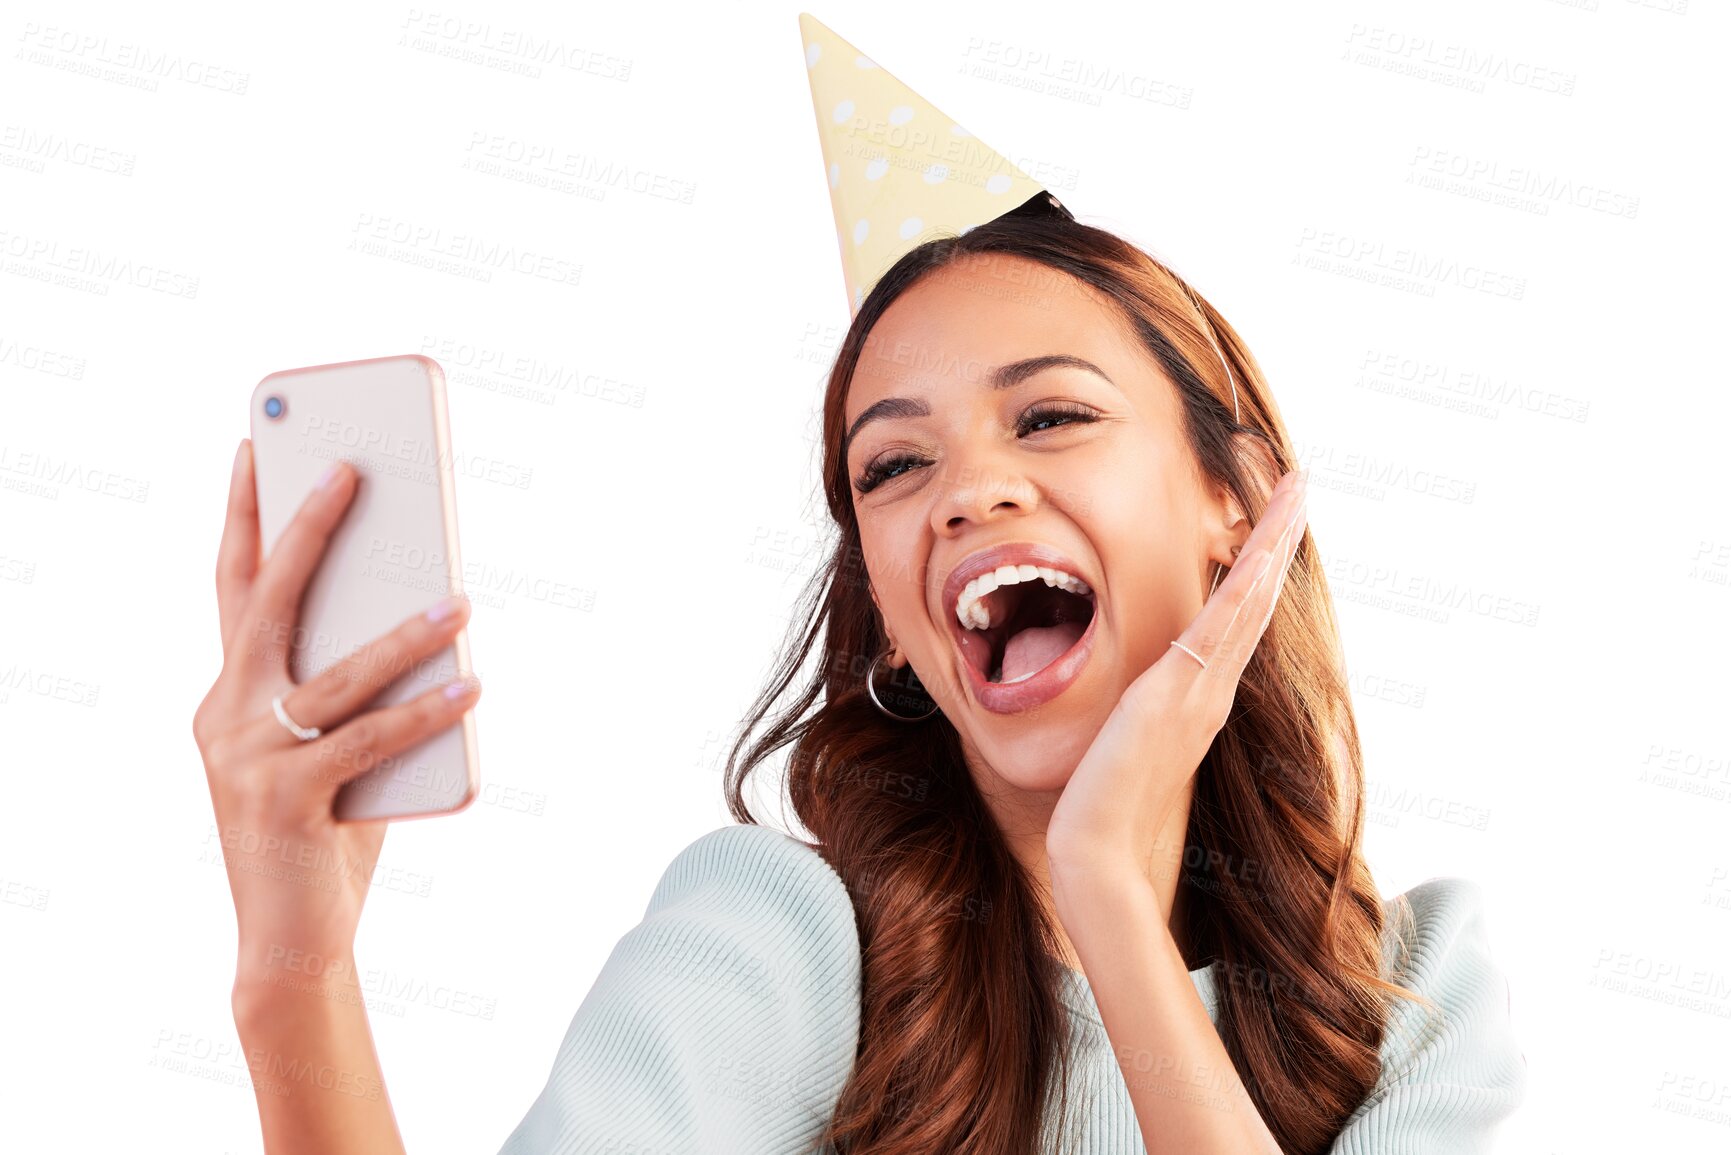 Buy stock photo Party, happy and birthday with woman and selfie on png for celebration, social media and log. Smile, picture and post with person isolated on transparent background for happiness, update and blog